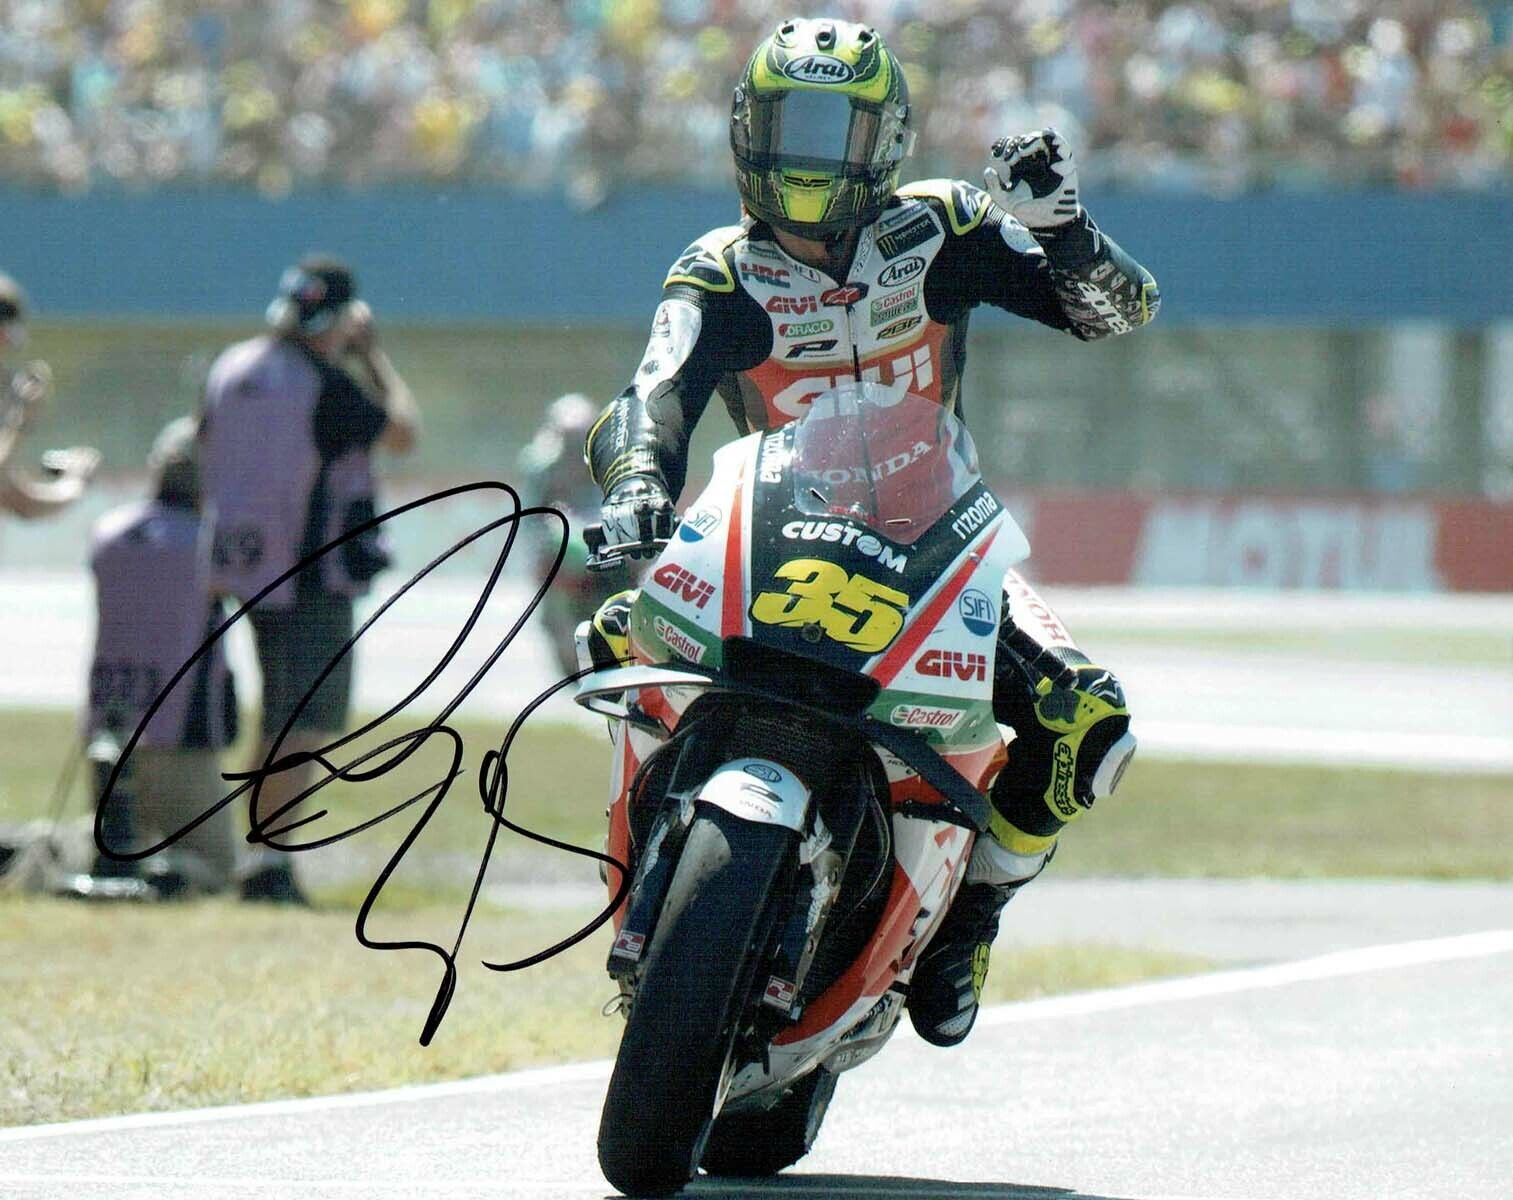 Cal CRUTCHLOW 2019 SIGNED LCR HONDA Autograph 10x8 Photo Poster painting 1 AFTAL COA